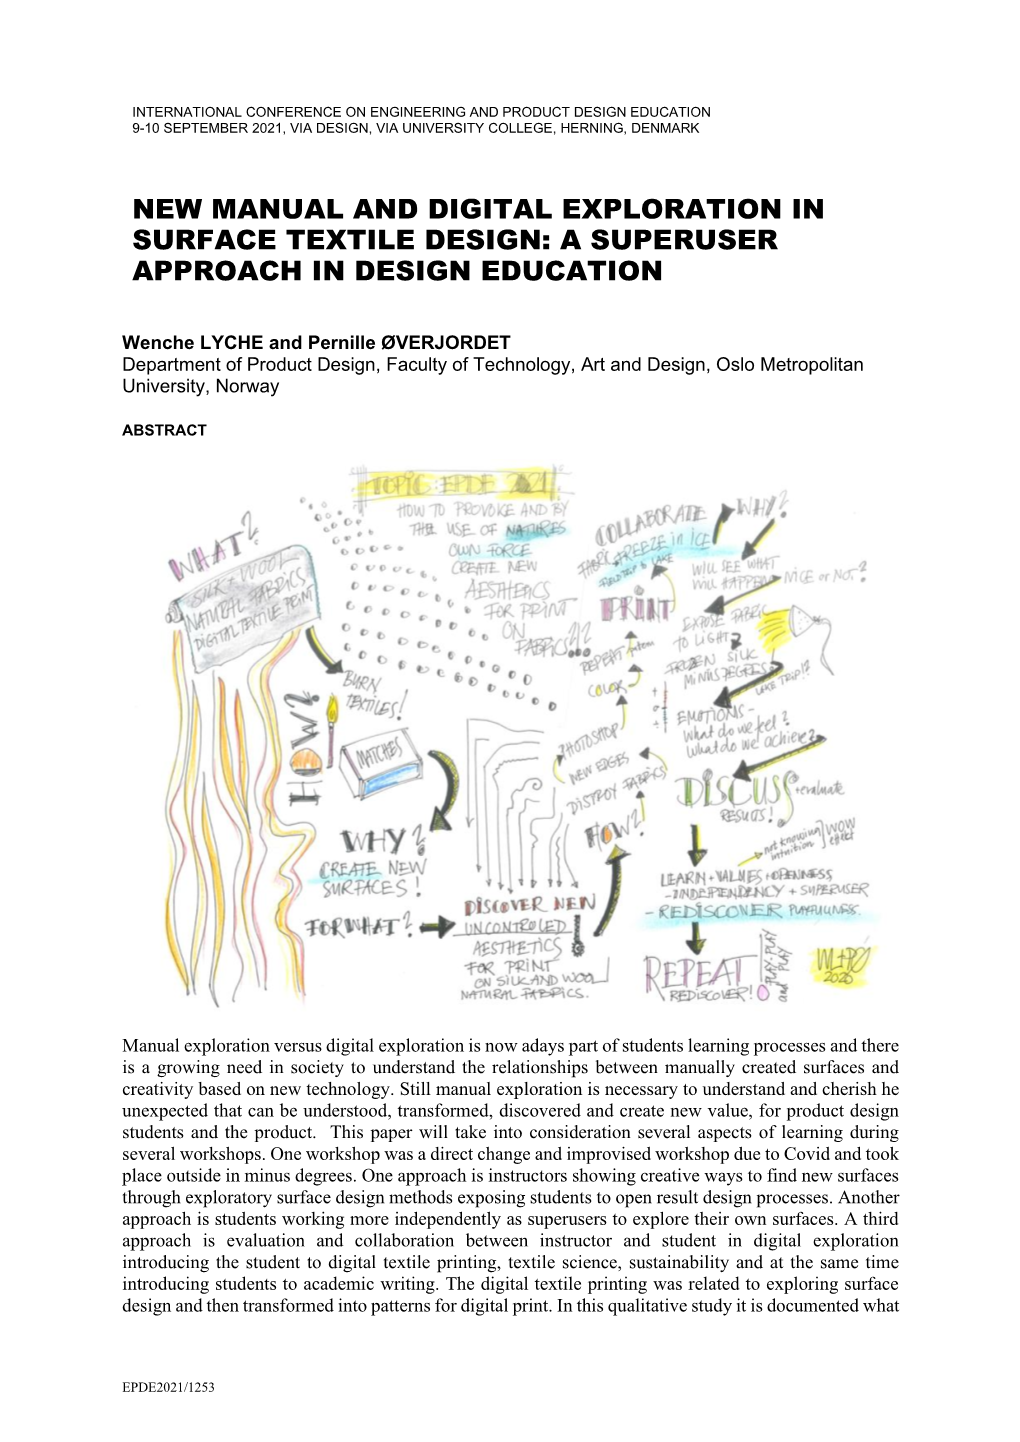 New Manual and Digital Exploration in Surface Textile Design: a Superuser Approach in Design Education